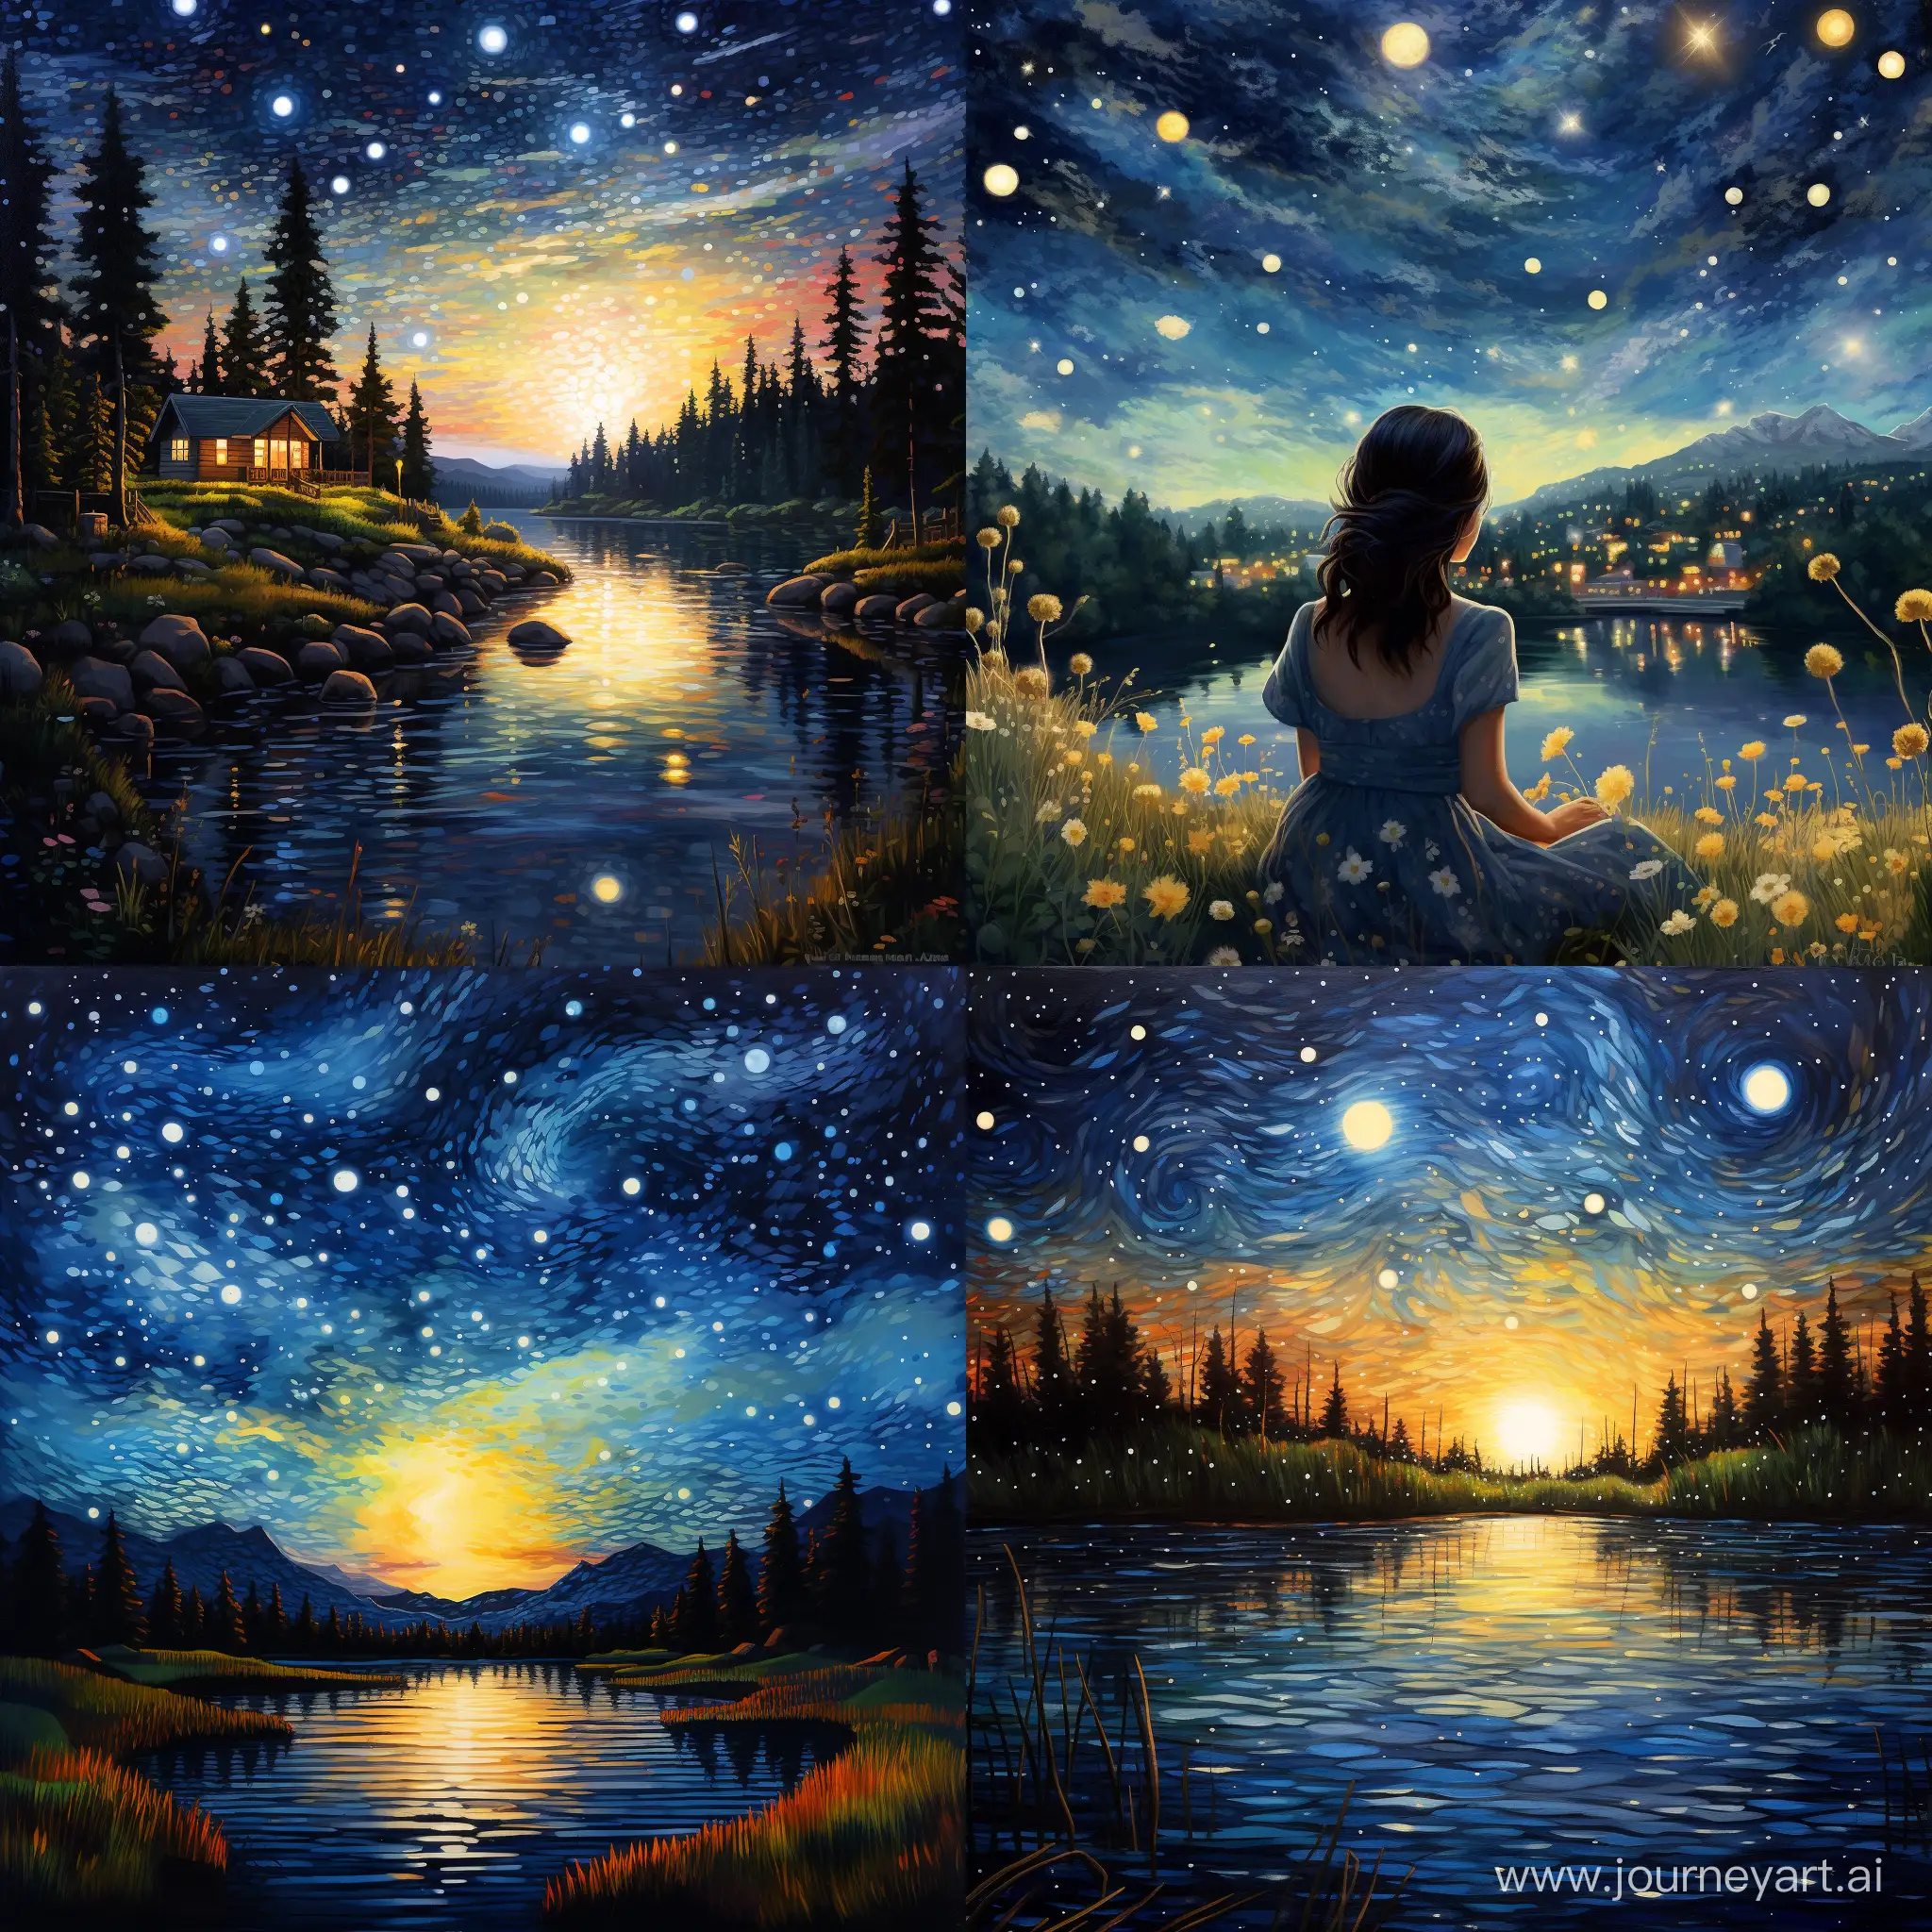 Summer-Starry-Night-Art-Square-Aspect-Ratio-with-Number-42051